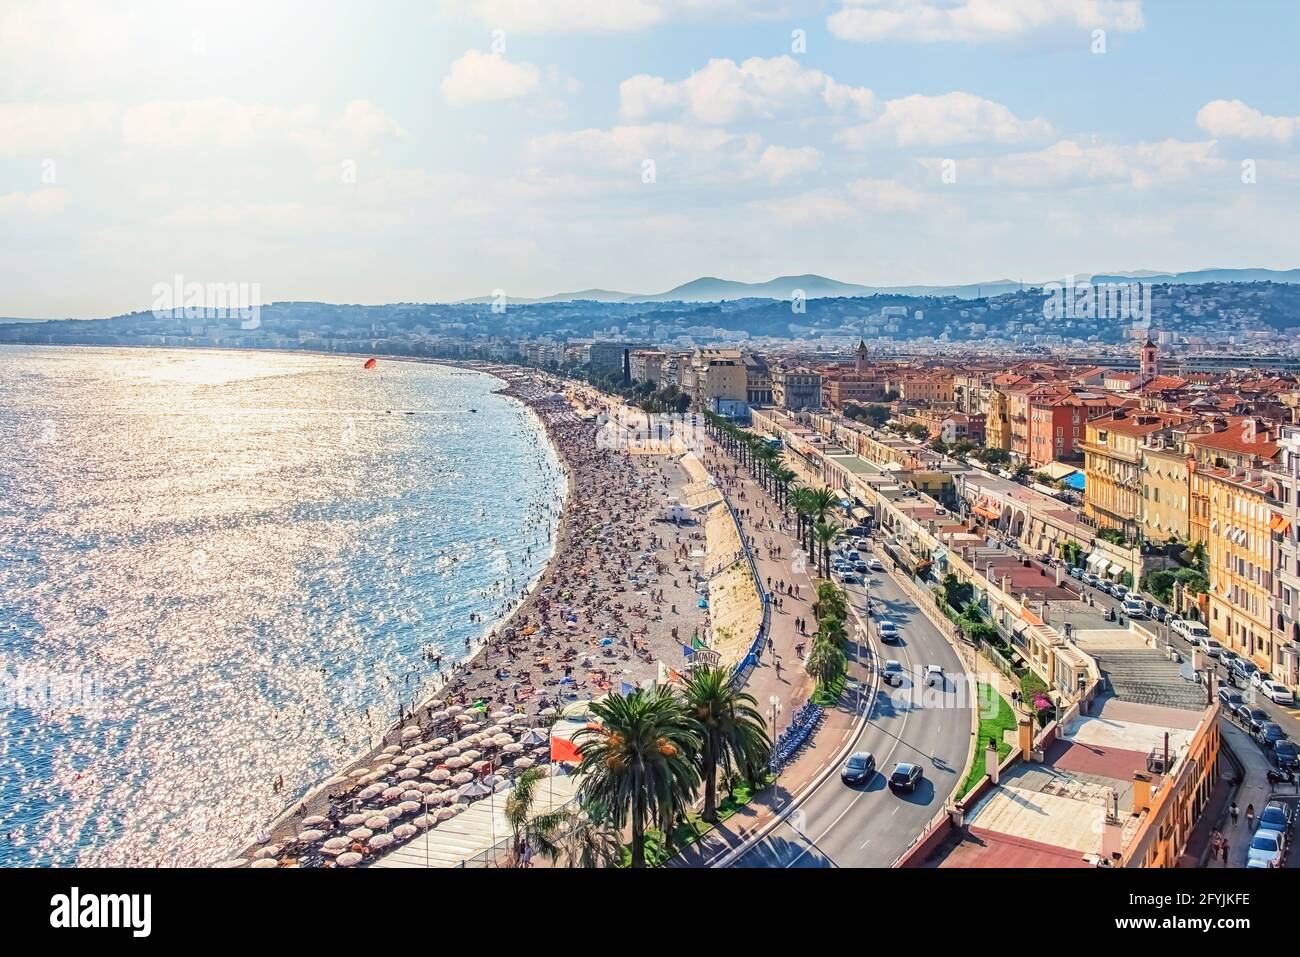 The city of Nice on the French Riviera Stock Photo